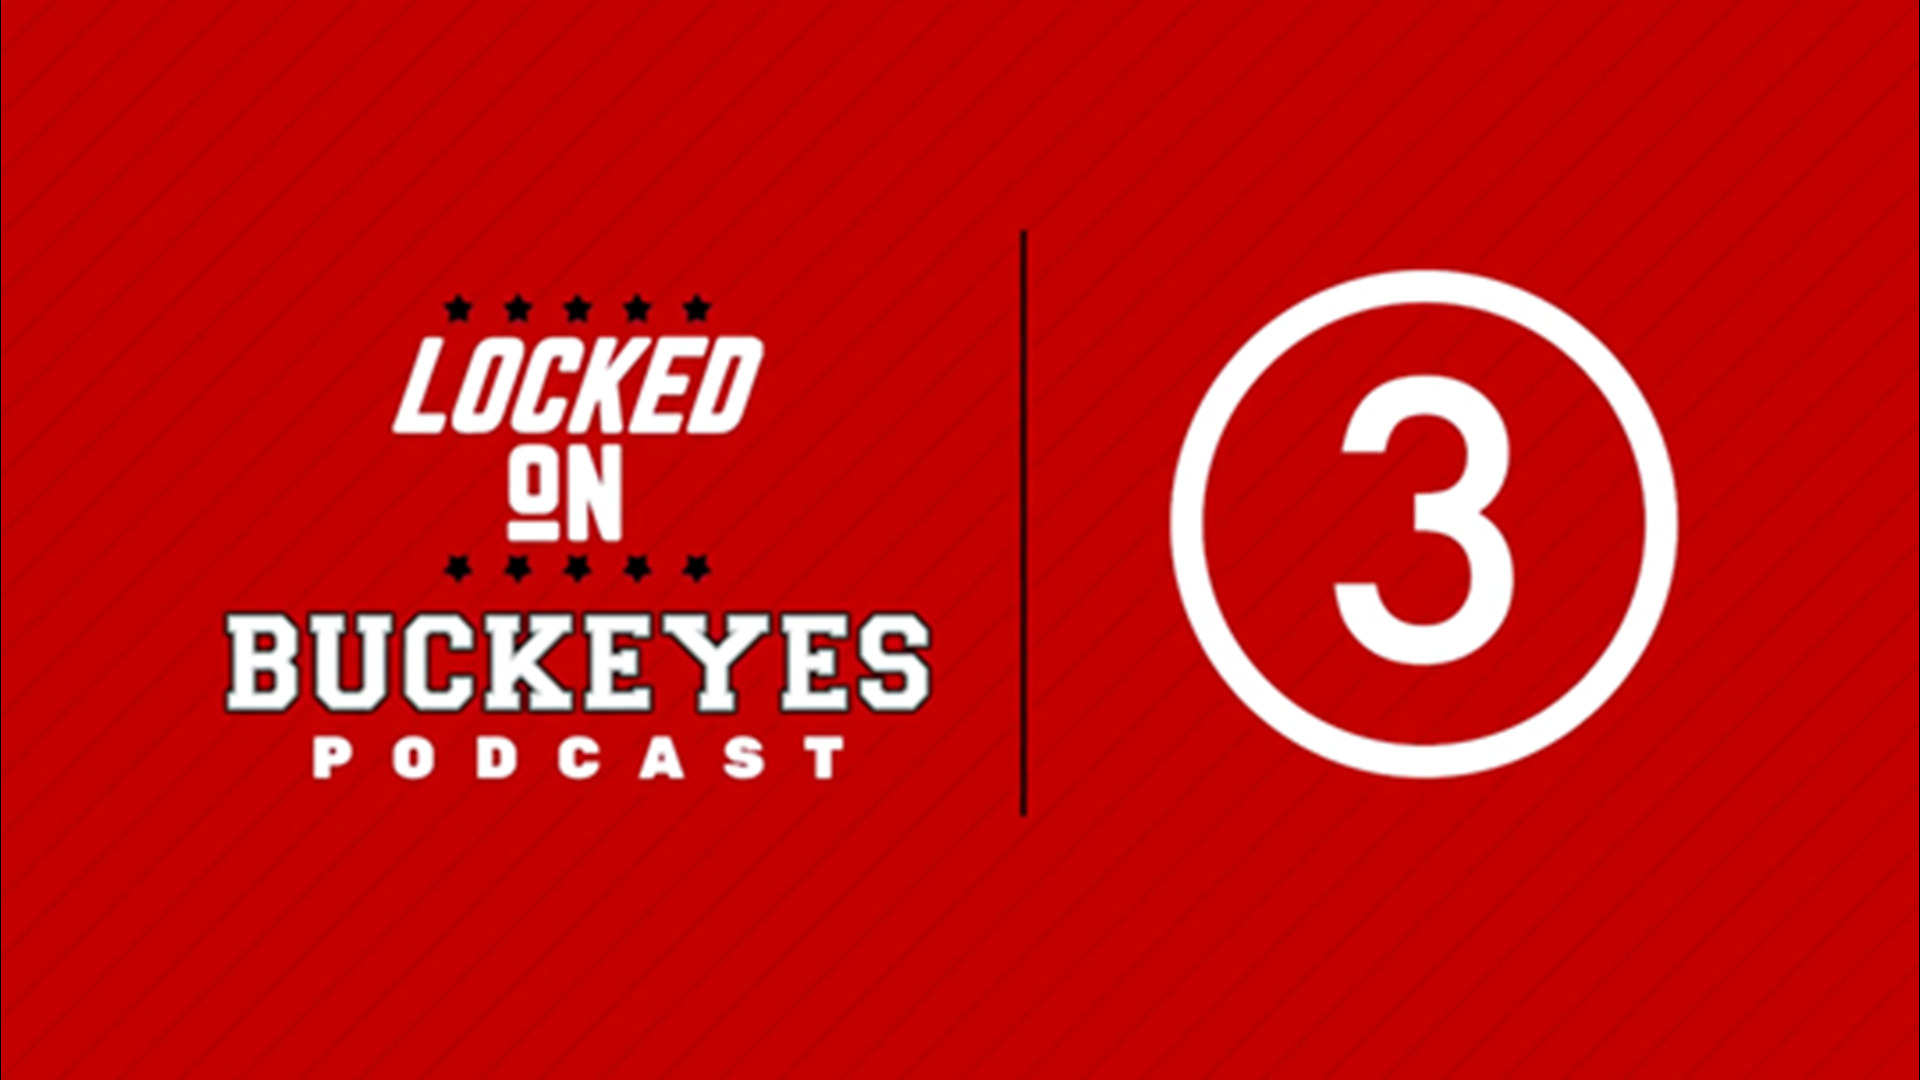 Jay Stephens is joined by Ryan Roberts for one last look at where Ohio State's prospects will land in the 2021 NFL Draft.